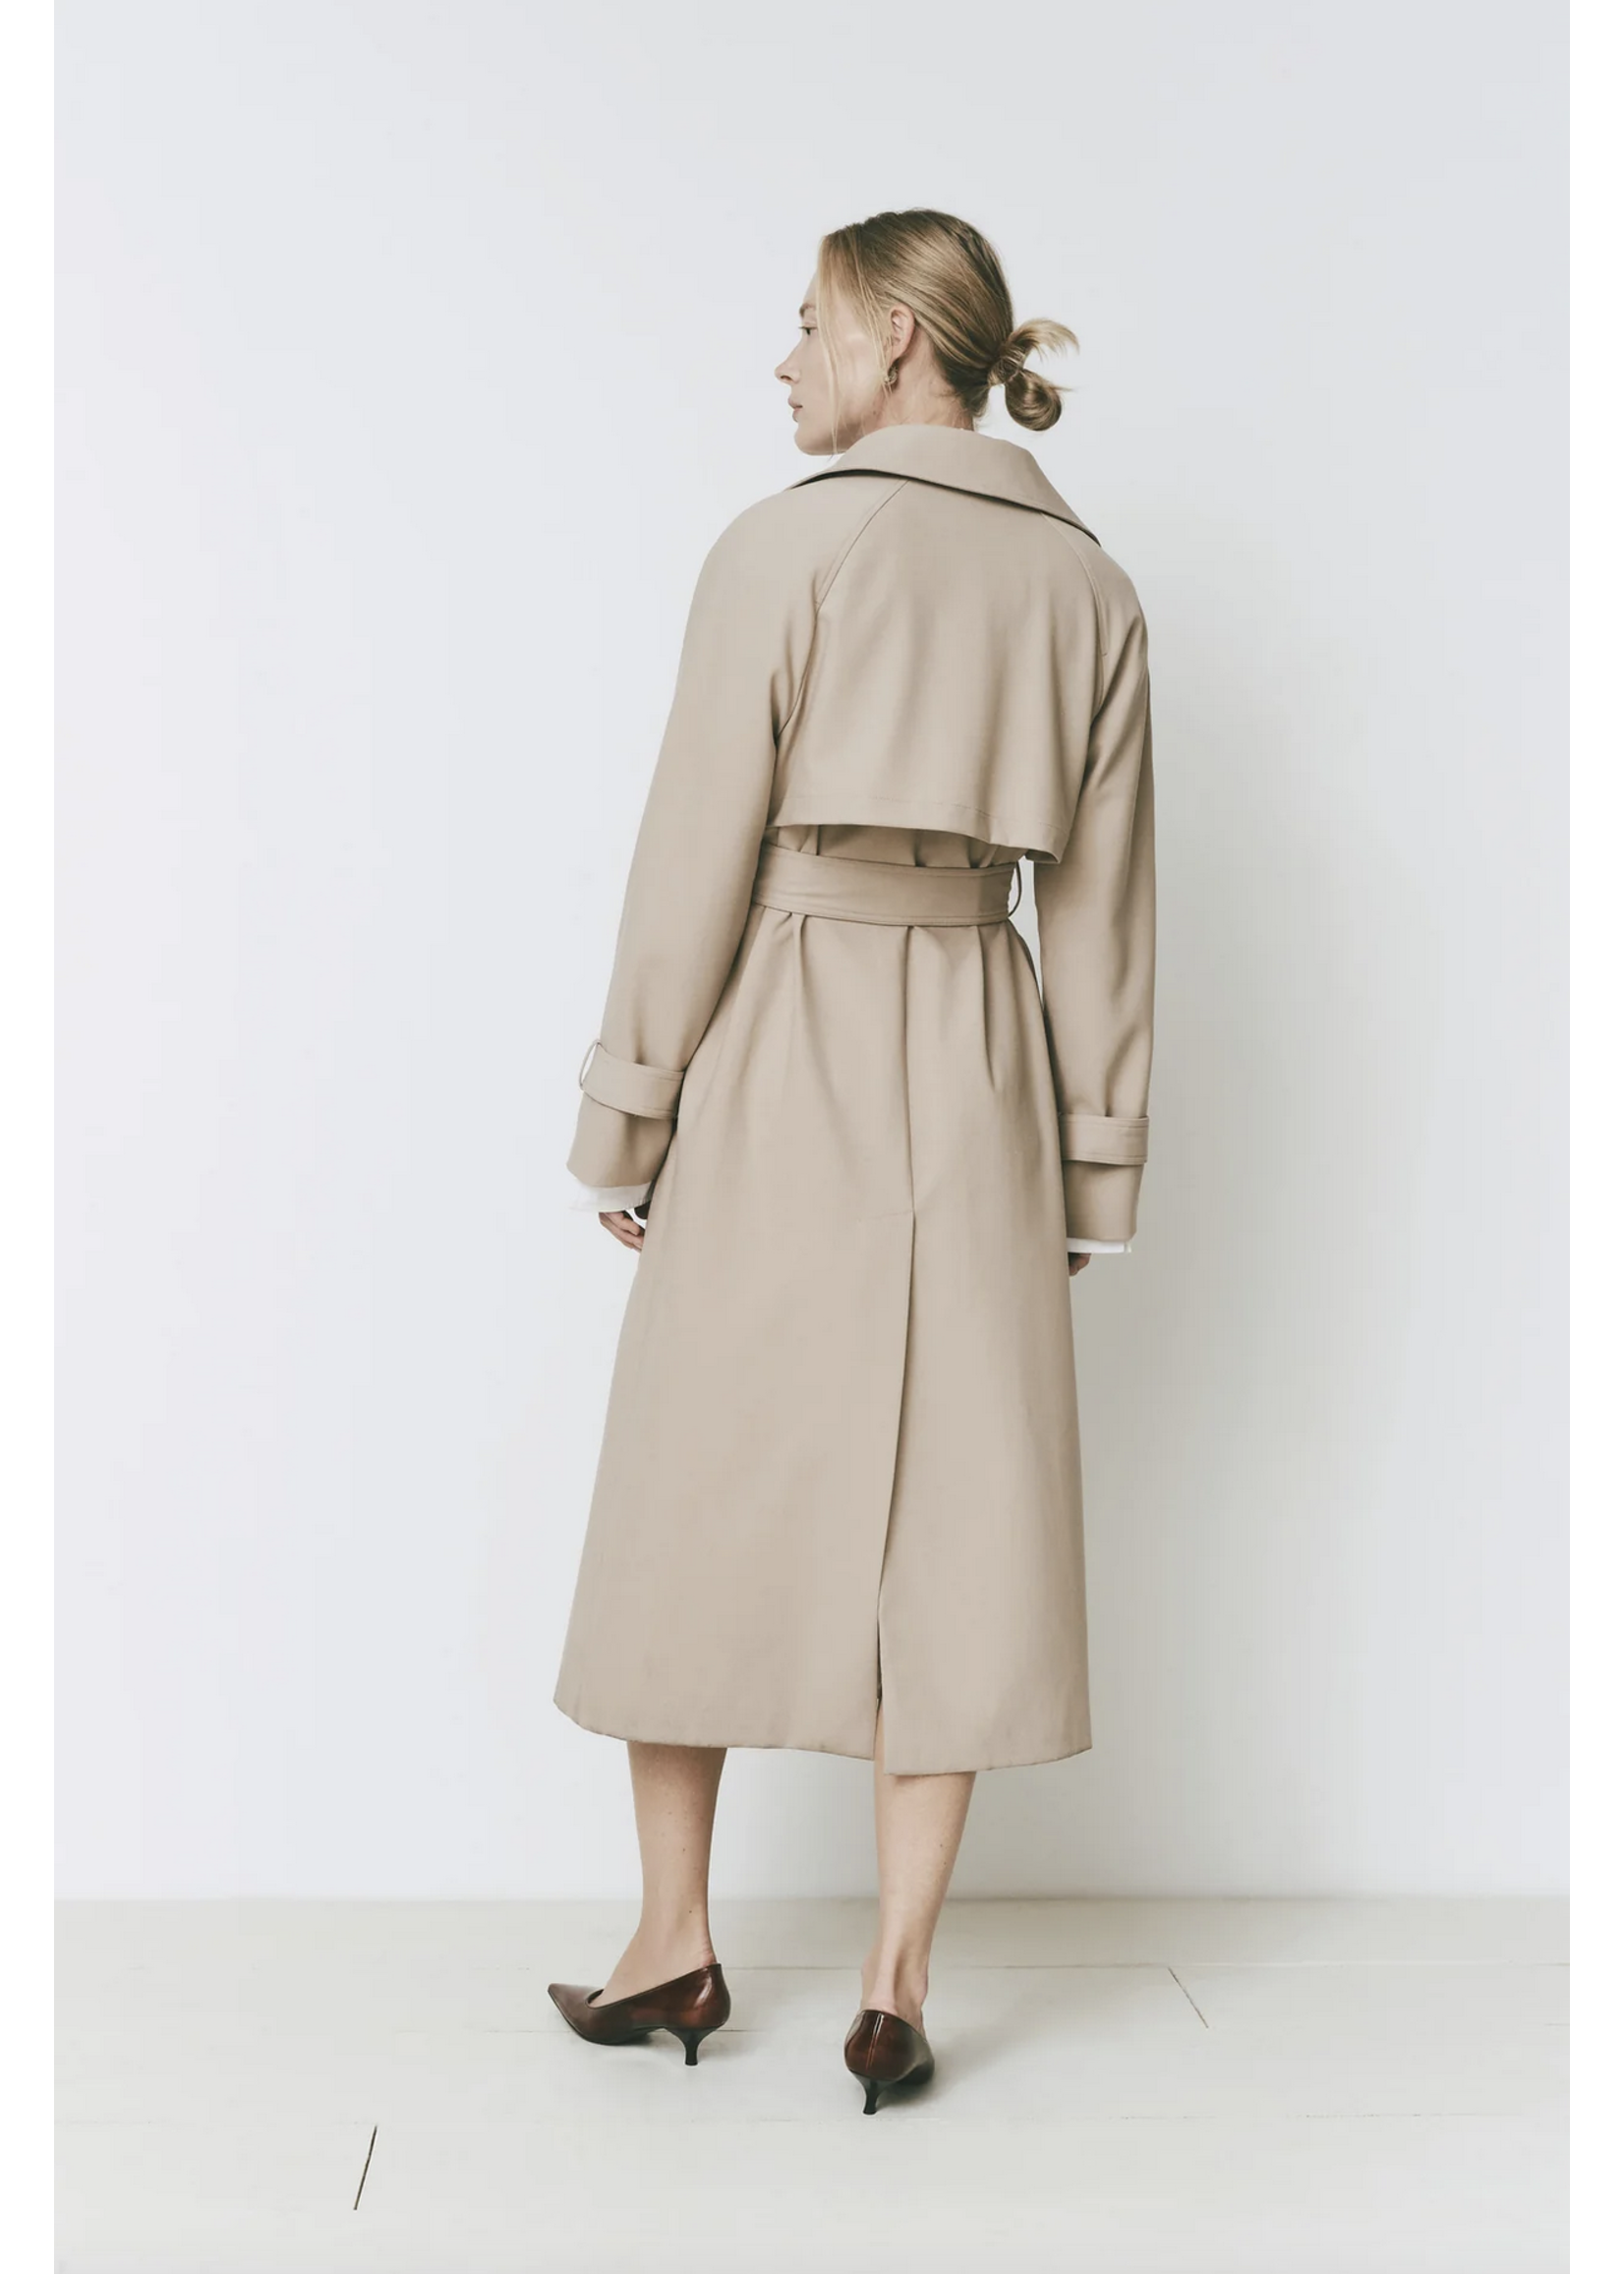 Rue Sophie Flaneur Trench Coat